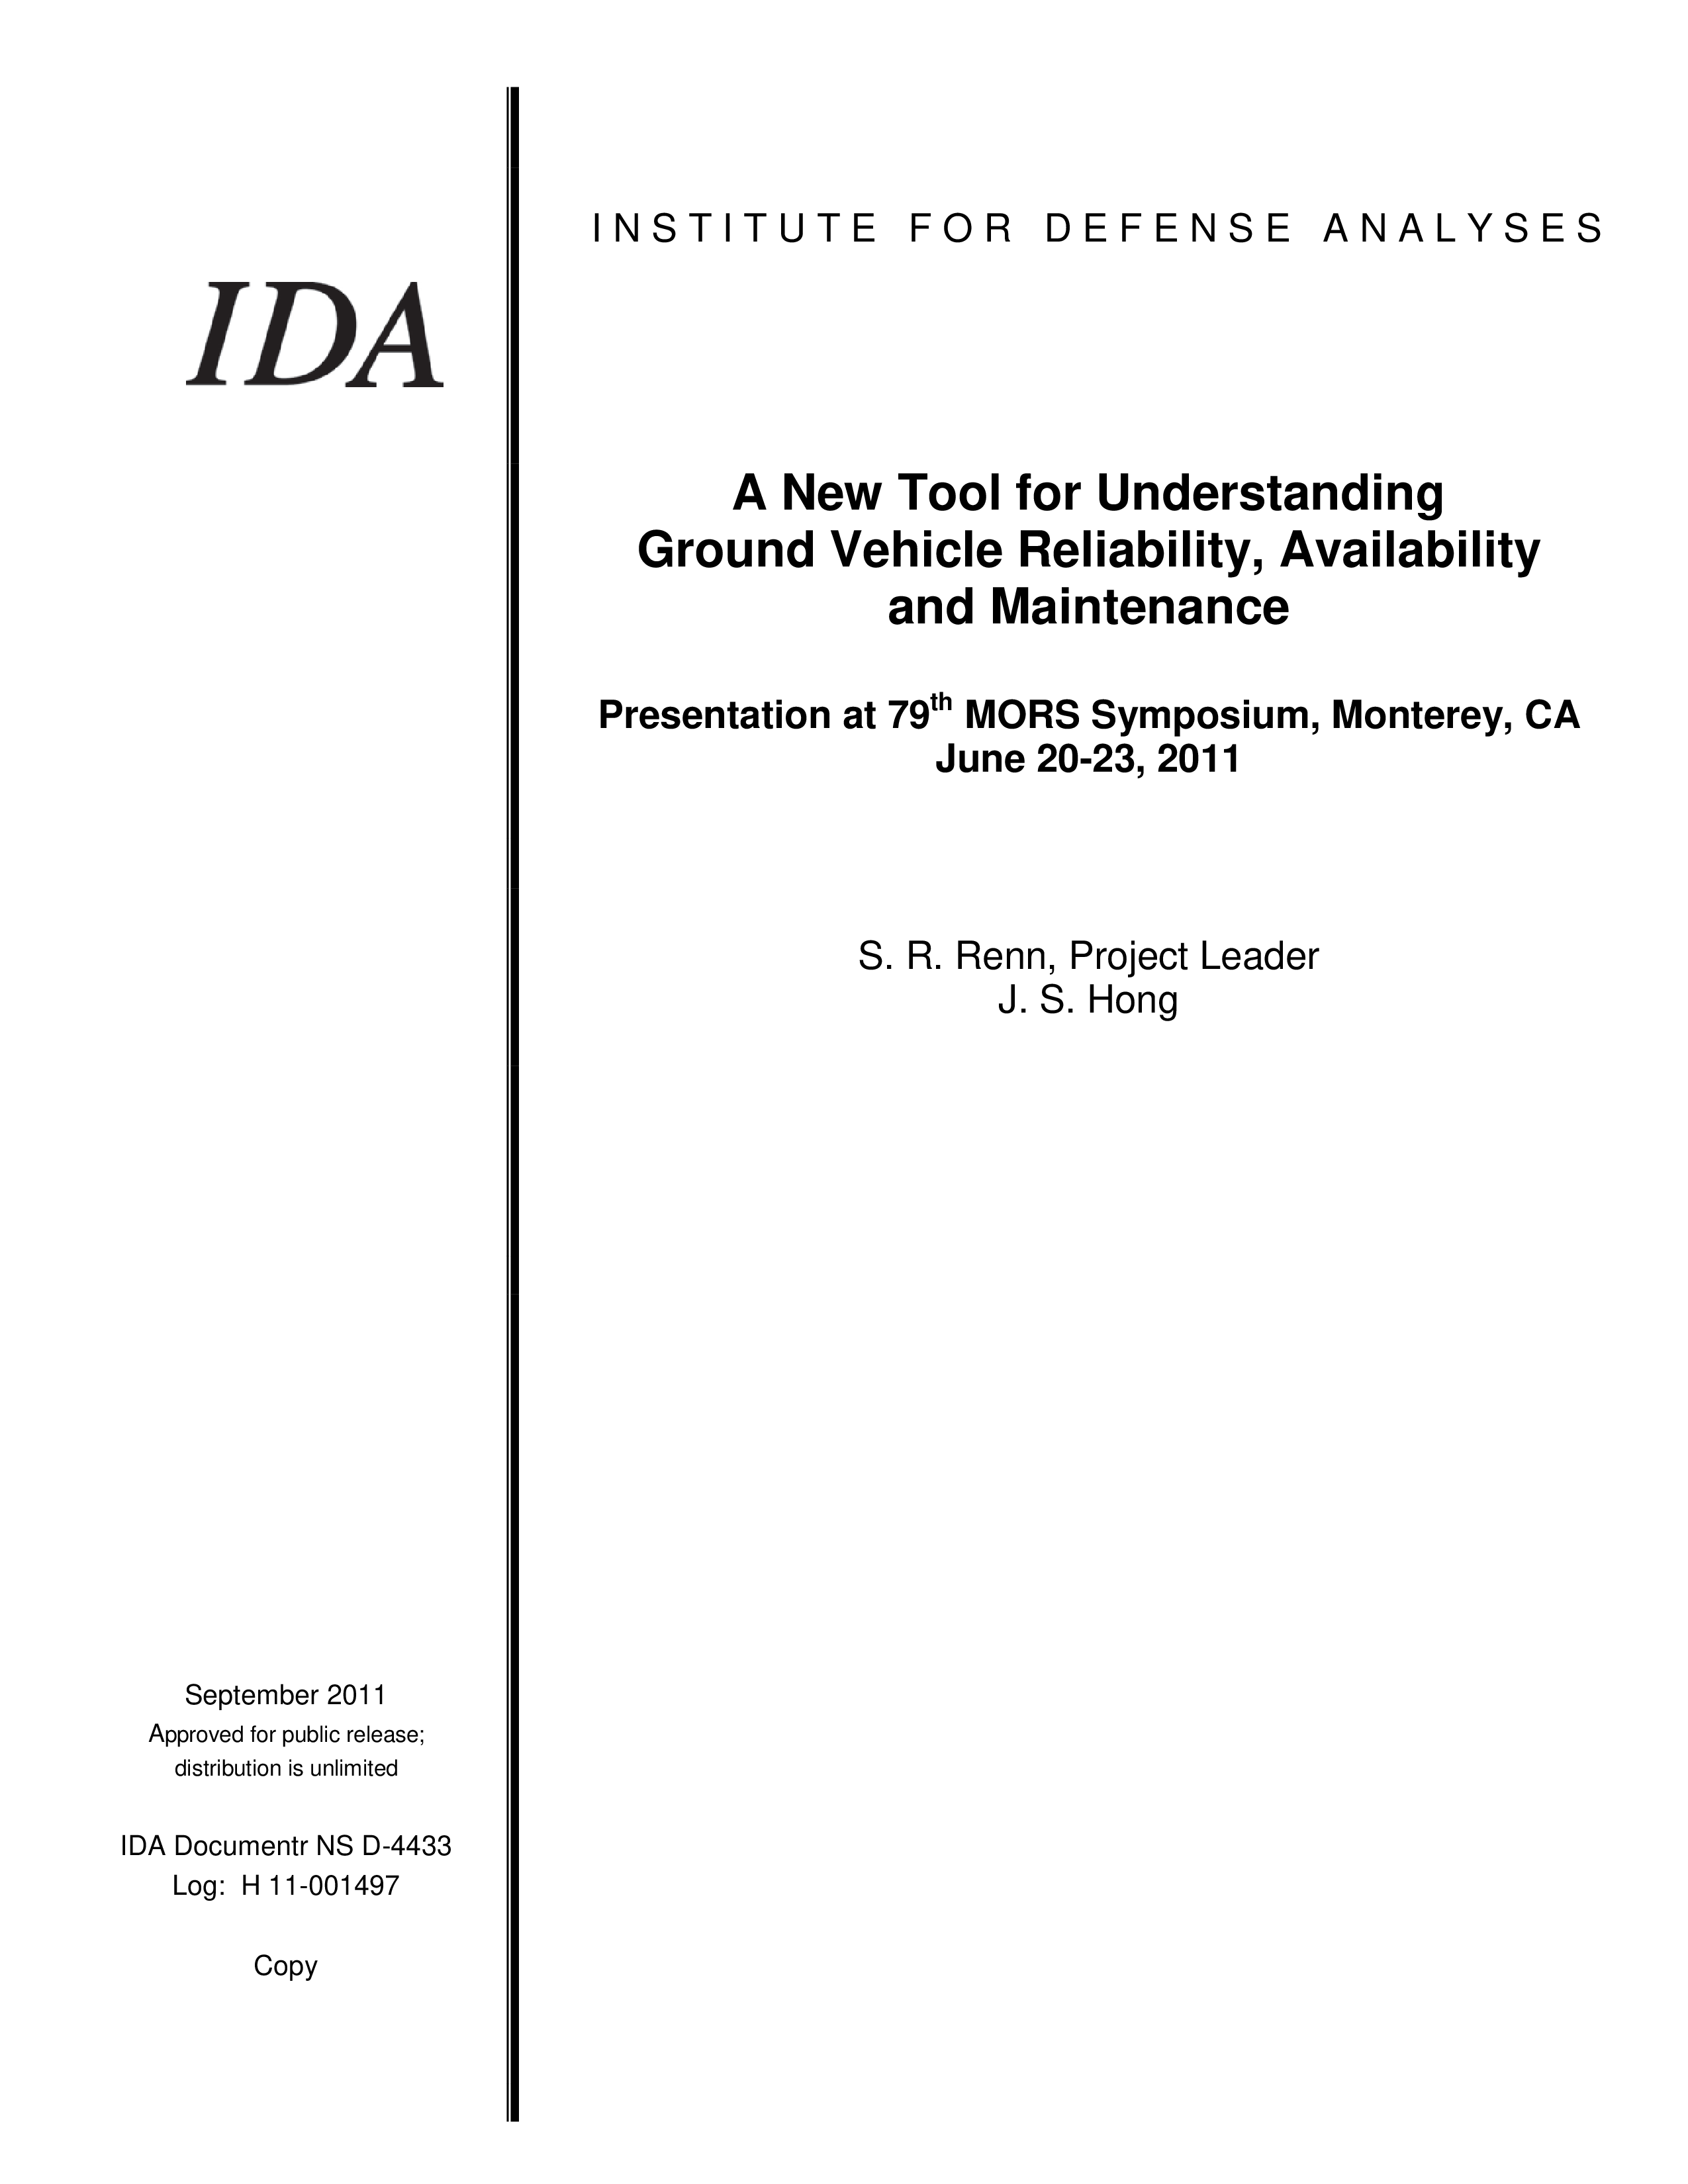 A New Tool for Understanding Ground Vehicle Reliability Availability and Maintenance, Presentation at 79th MORS Symposium, Monterey, CA June 20-23, 2011